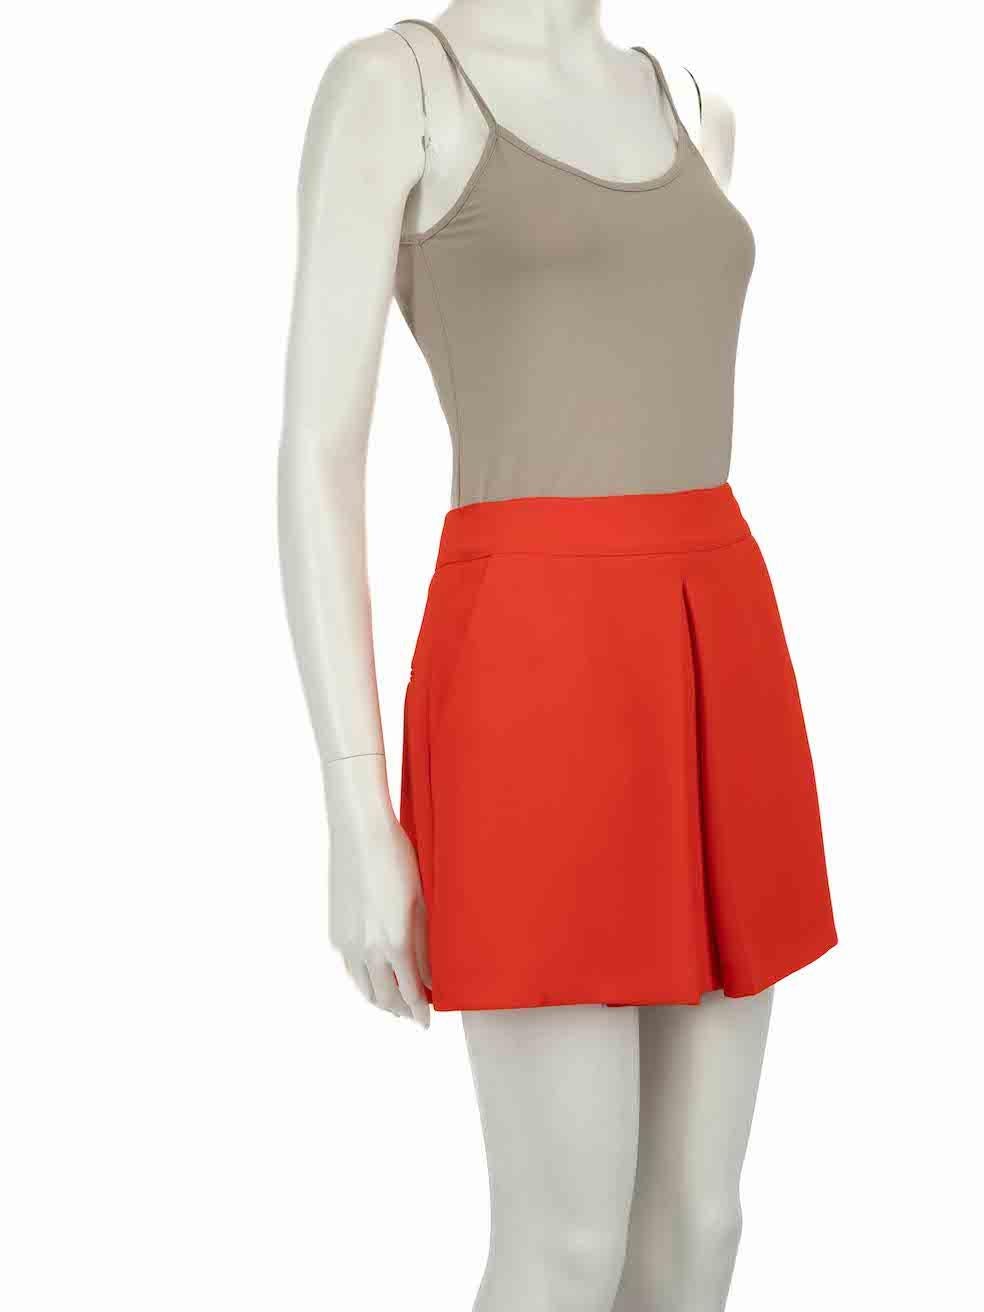 CONDITION is Very good. Minimal wear to skirt is evident. Minimal wear to the right-side of the front hem with a mark on this used McQ designer resale item.
 
 
 
 Details
 
 
 Orange
 
 Polyester
 
 Skirt
 
 Mini
 
 Pleated
 
 2x Side pockets
 
